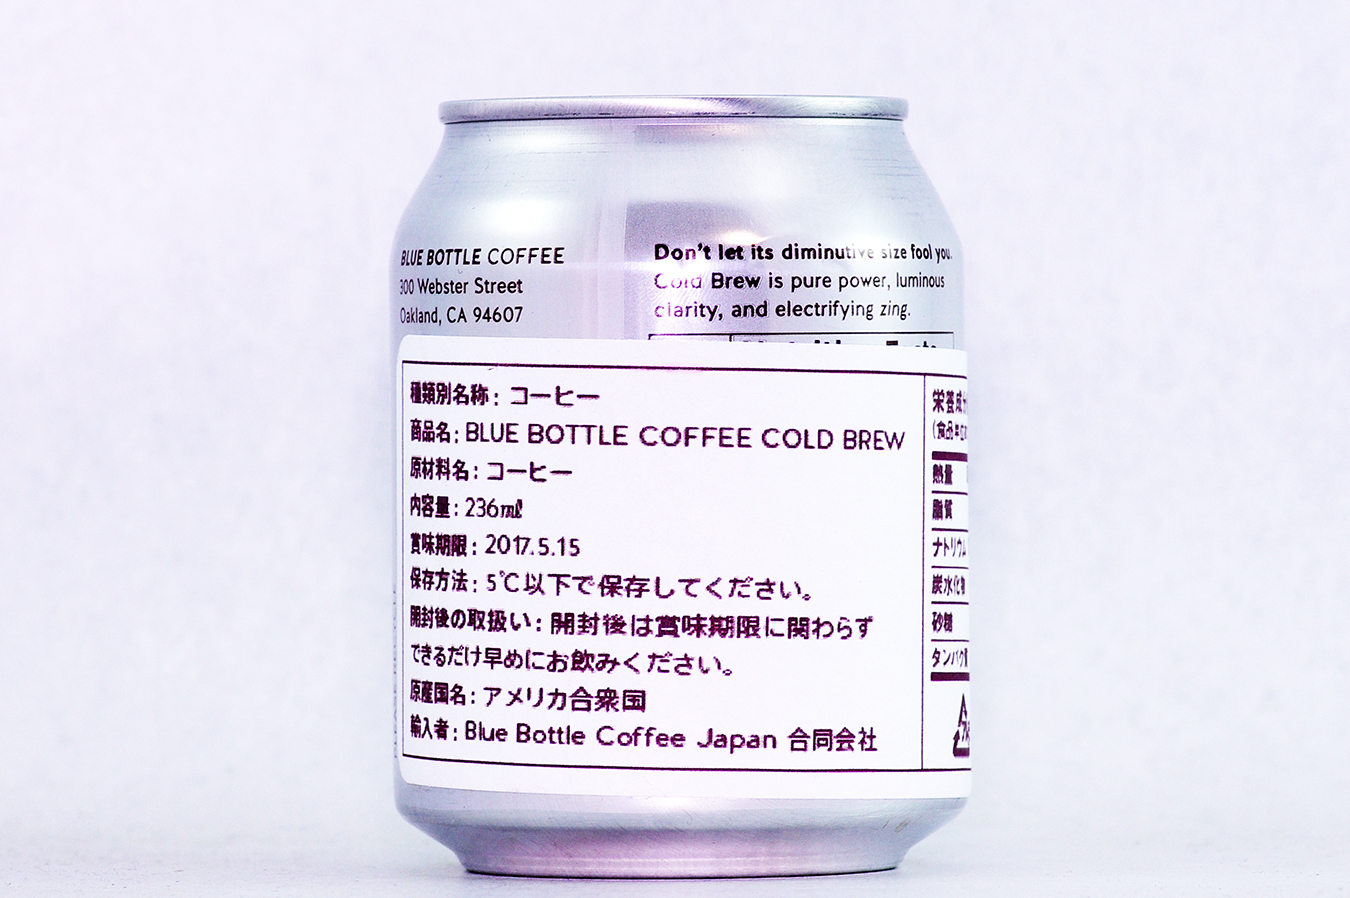 BLUE BOTTLE COFFEE COLD BREW 裏面 2017年3月